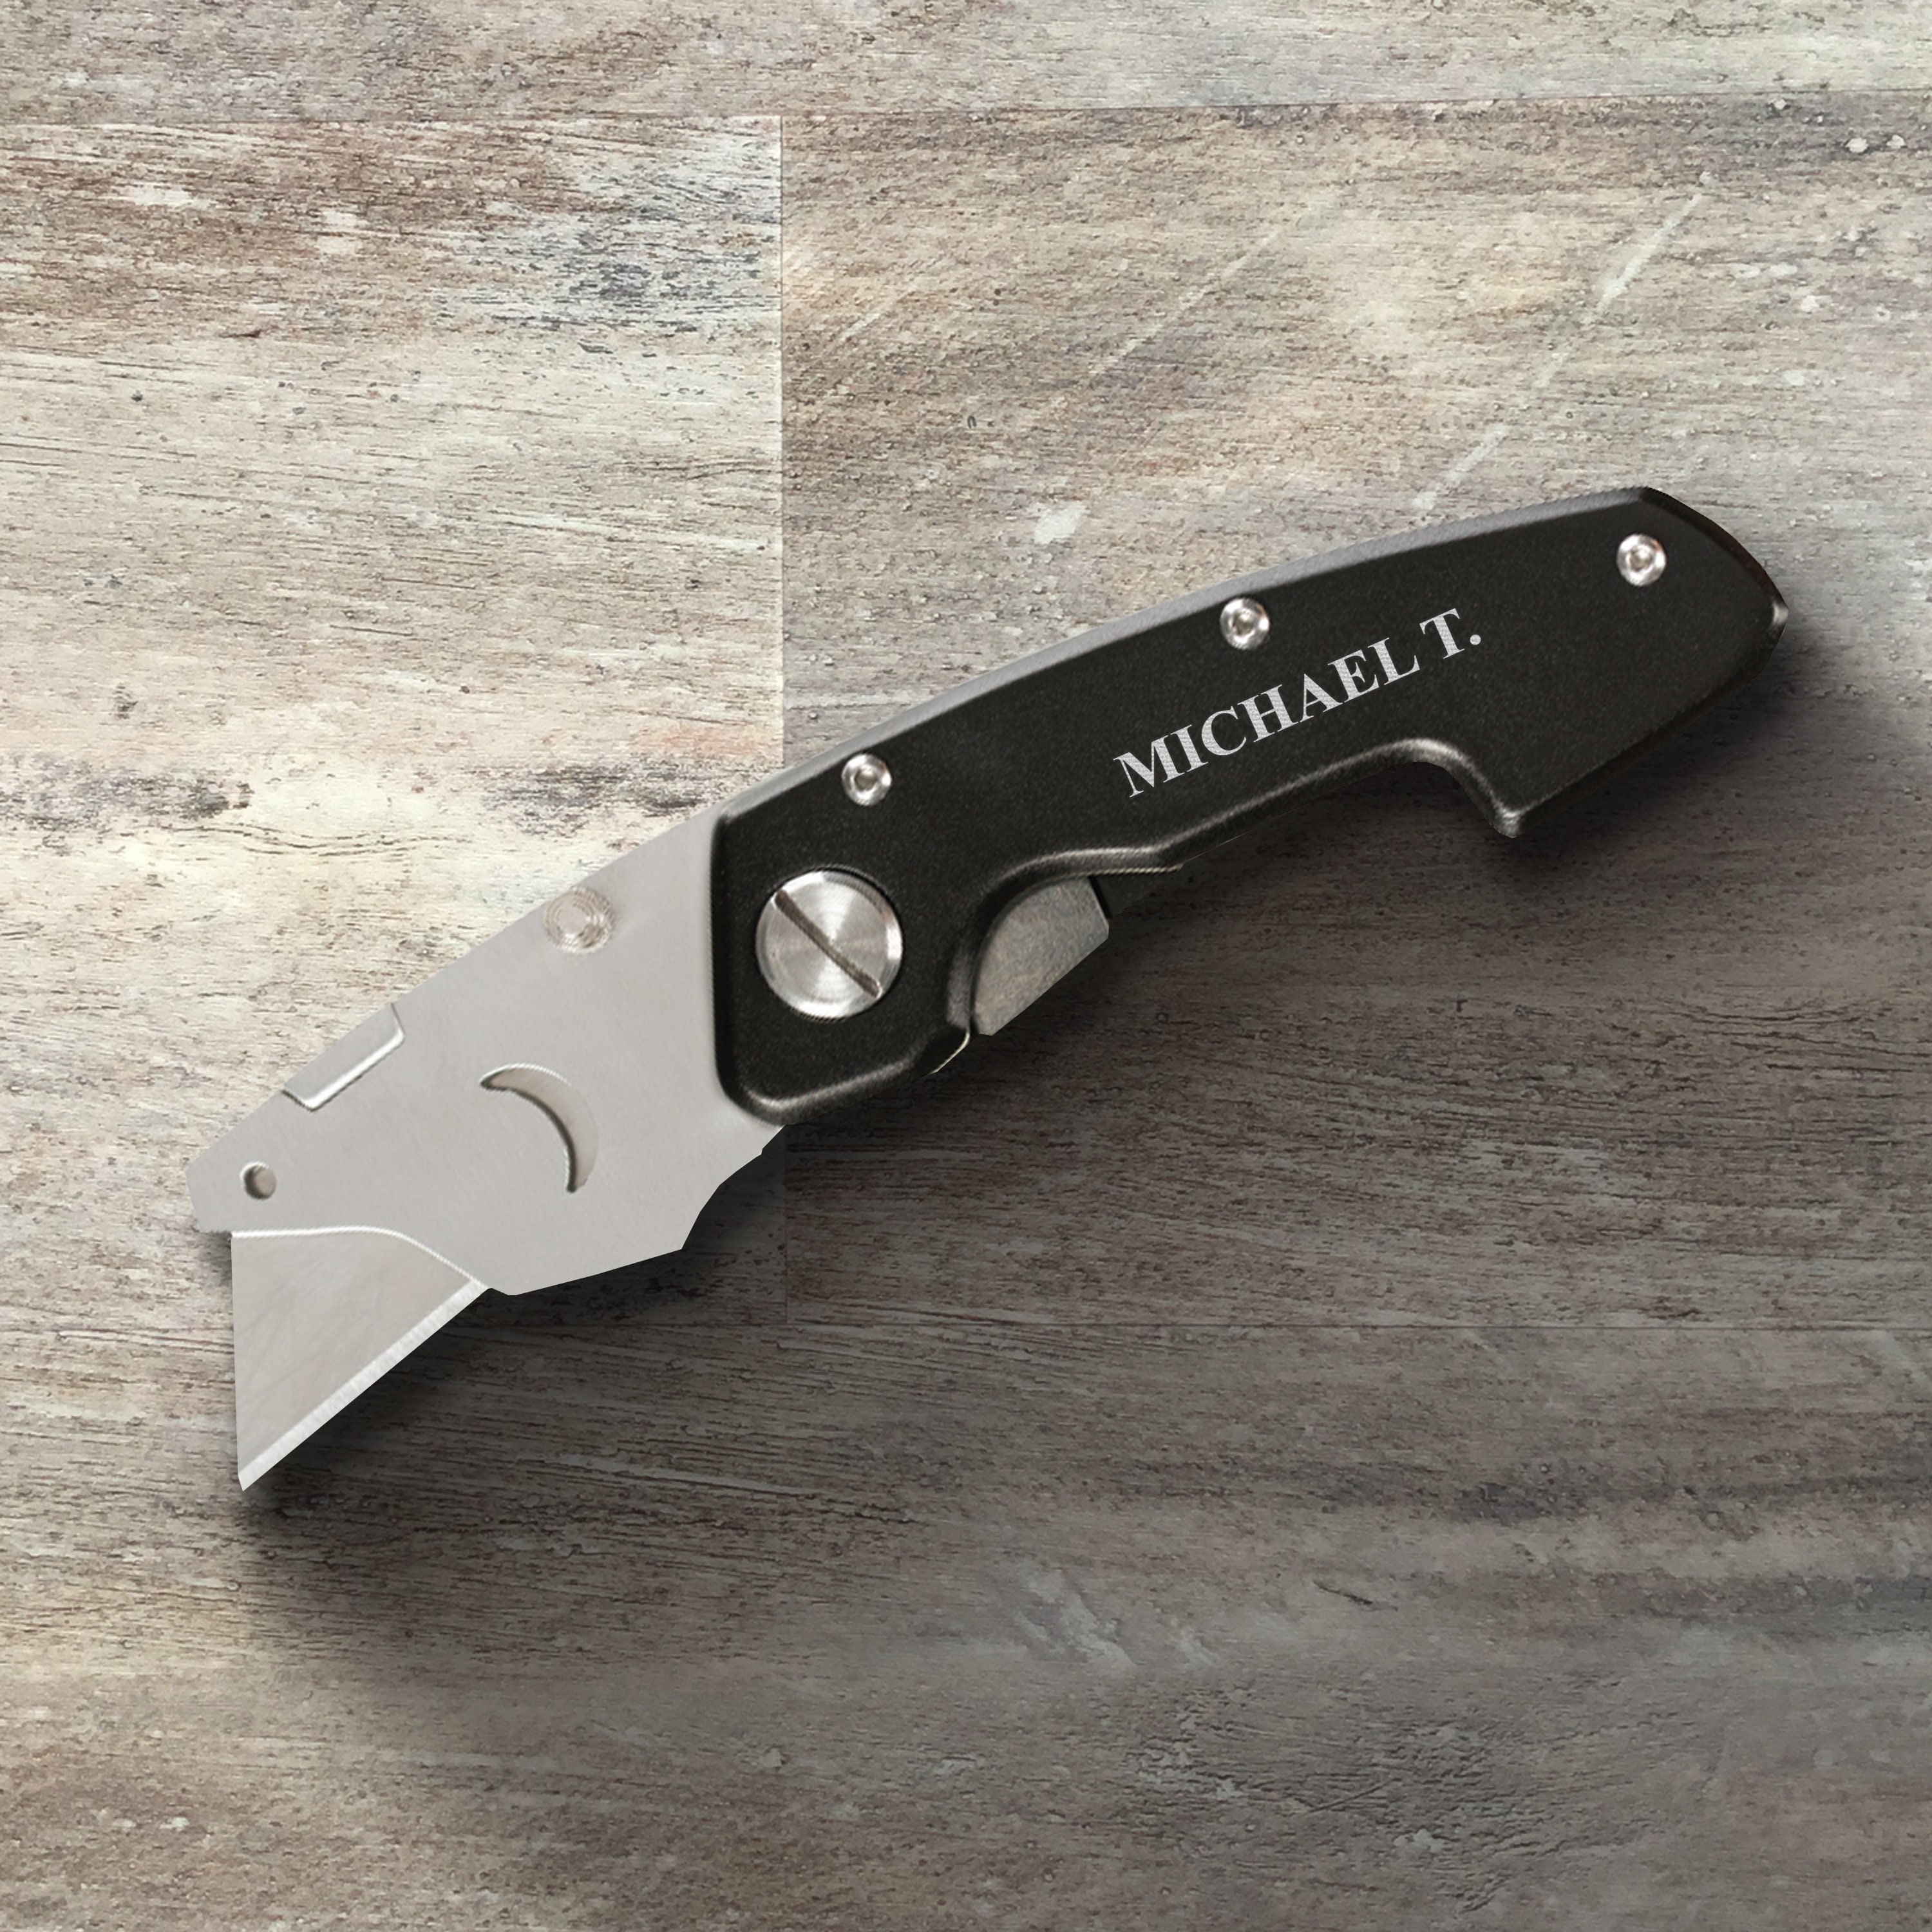 Xflip 316 Stainless Steel Utility Knife, Hobby Knife Fits Xacto Knife  Blades. Made in the USA 